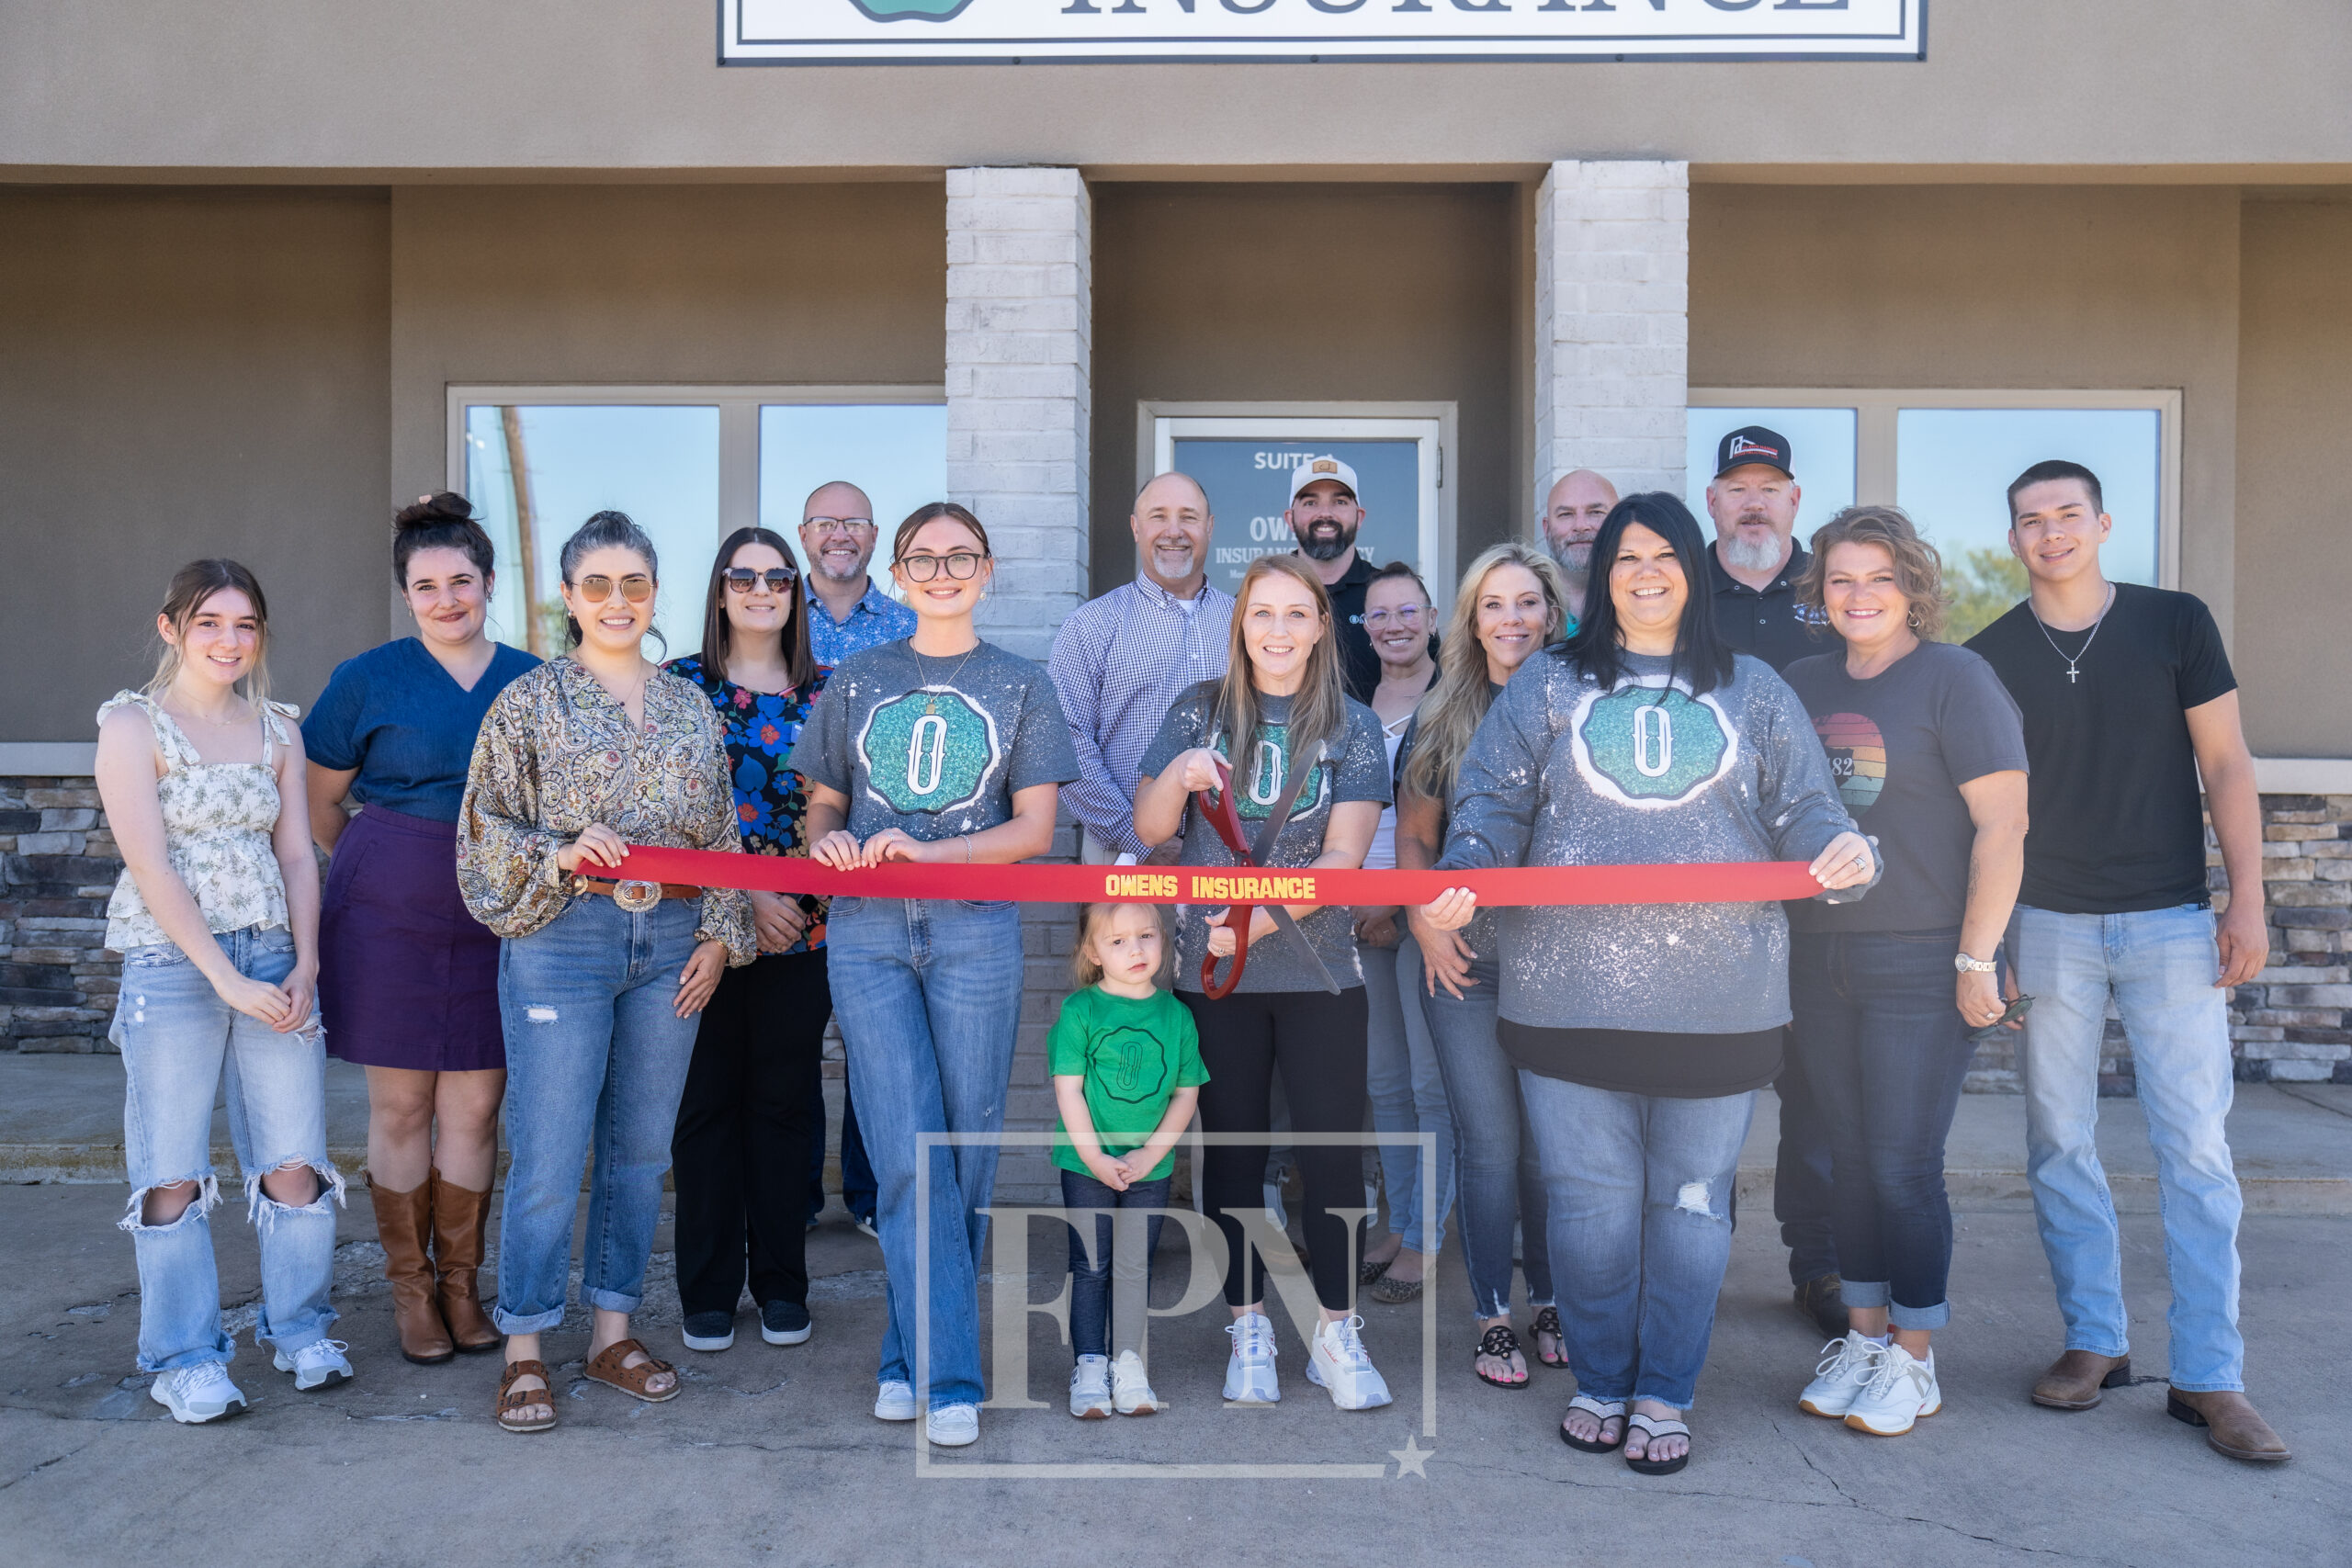 Owens Insurance Agency Grand Opening & Ribbon Cutting